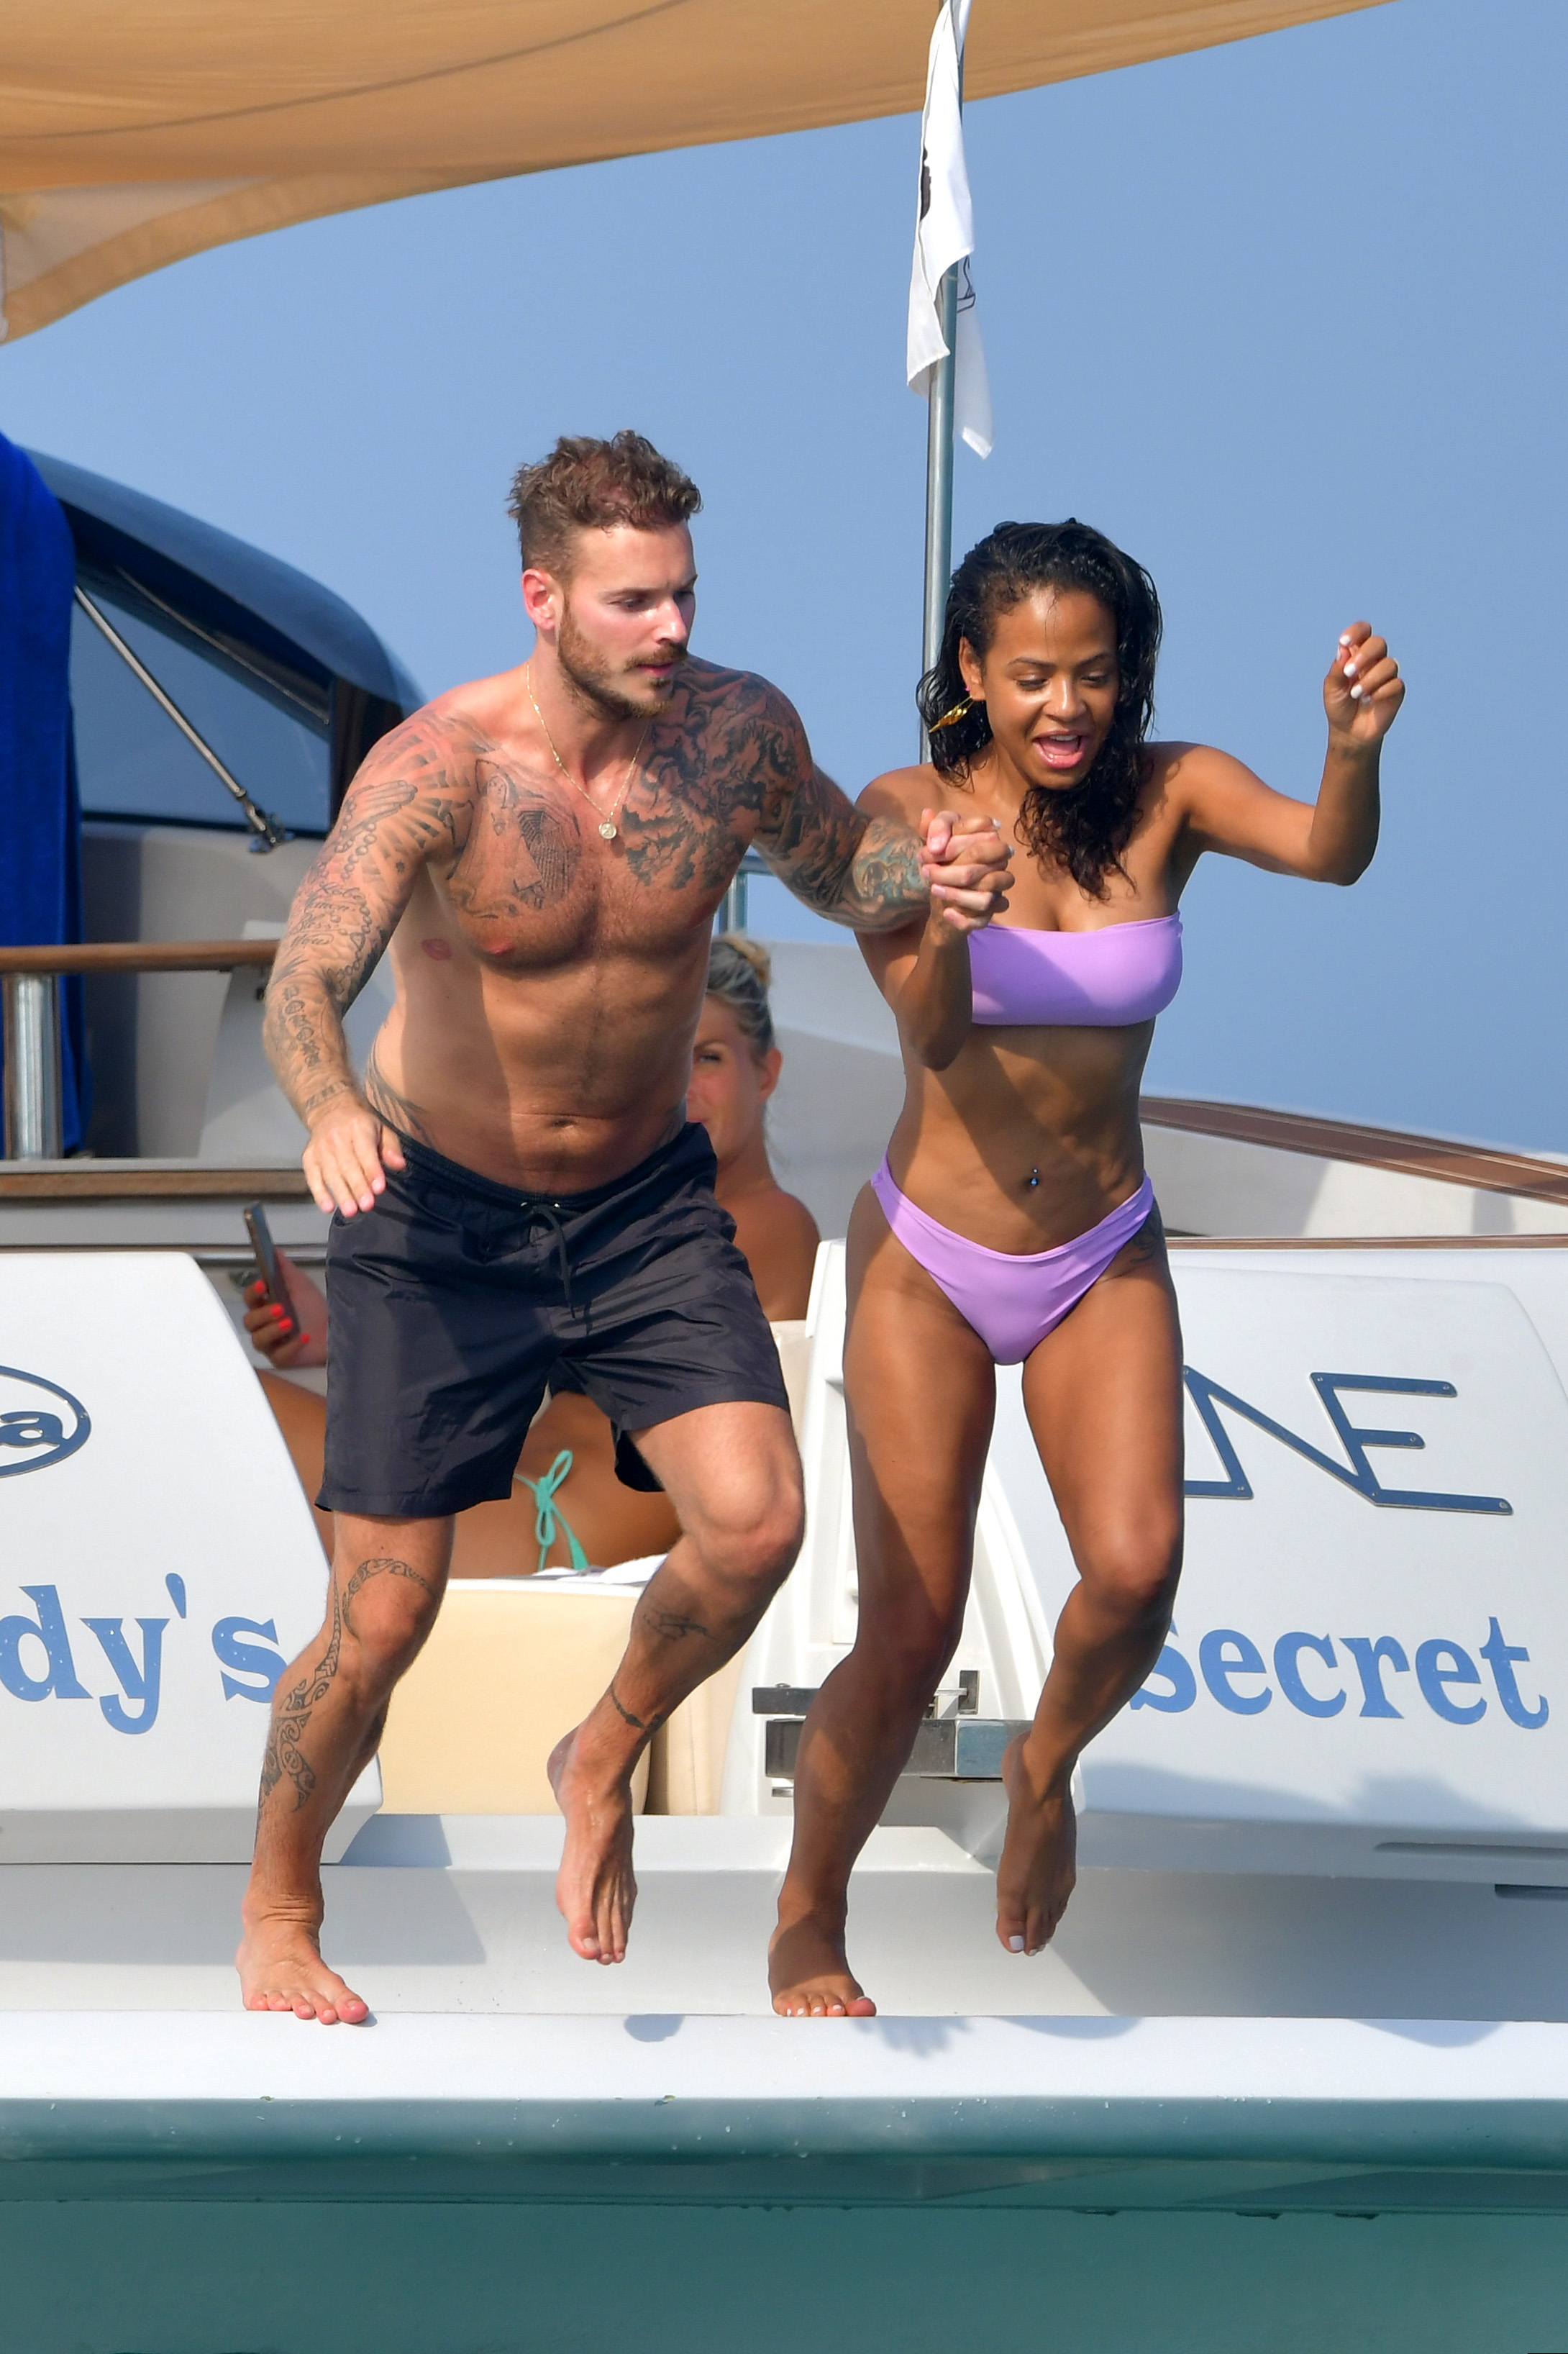 Christina Milian pokies and cameltoe in sexy bikini candids on a boat during holiday UHQ (29).jpg